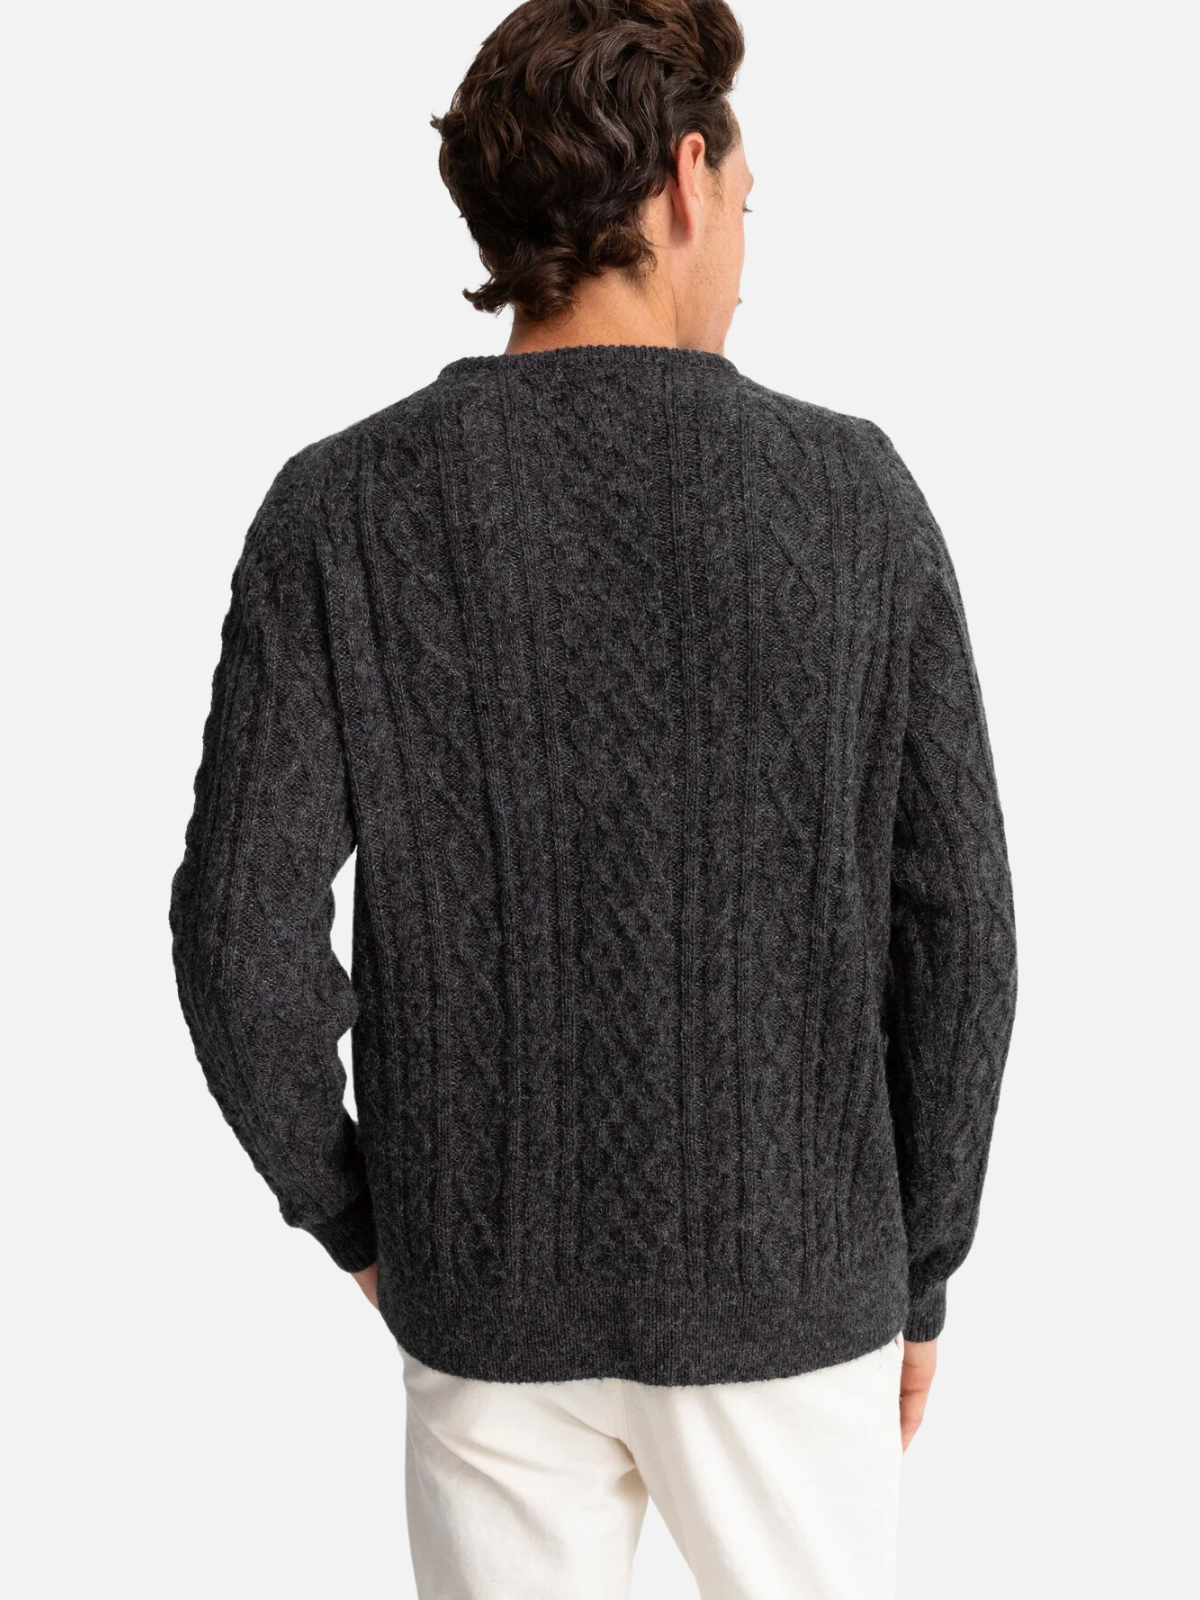 rhythm mohair wool blend fishermans cable knit crew neck sweater kempt athens ga georgia men's clothing store